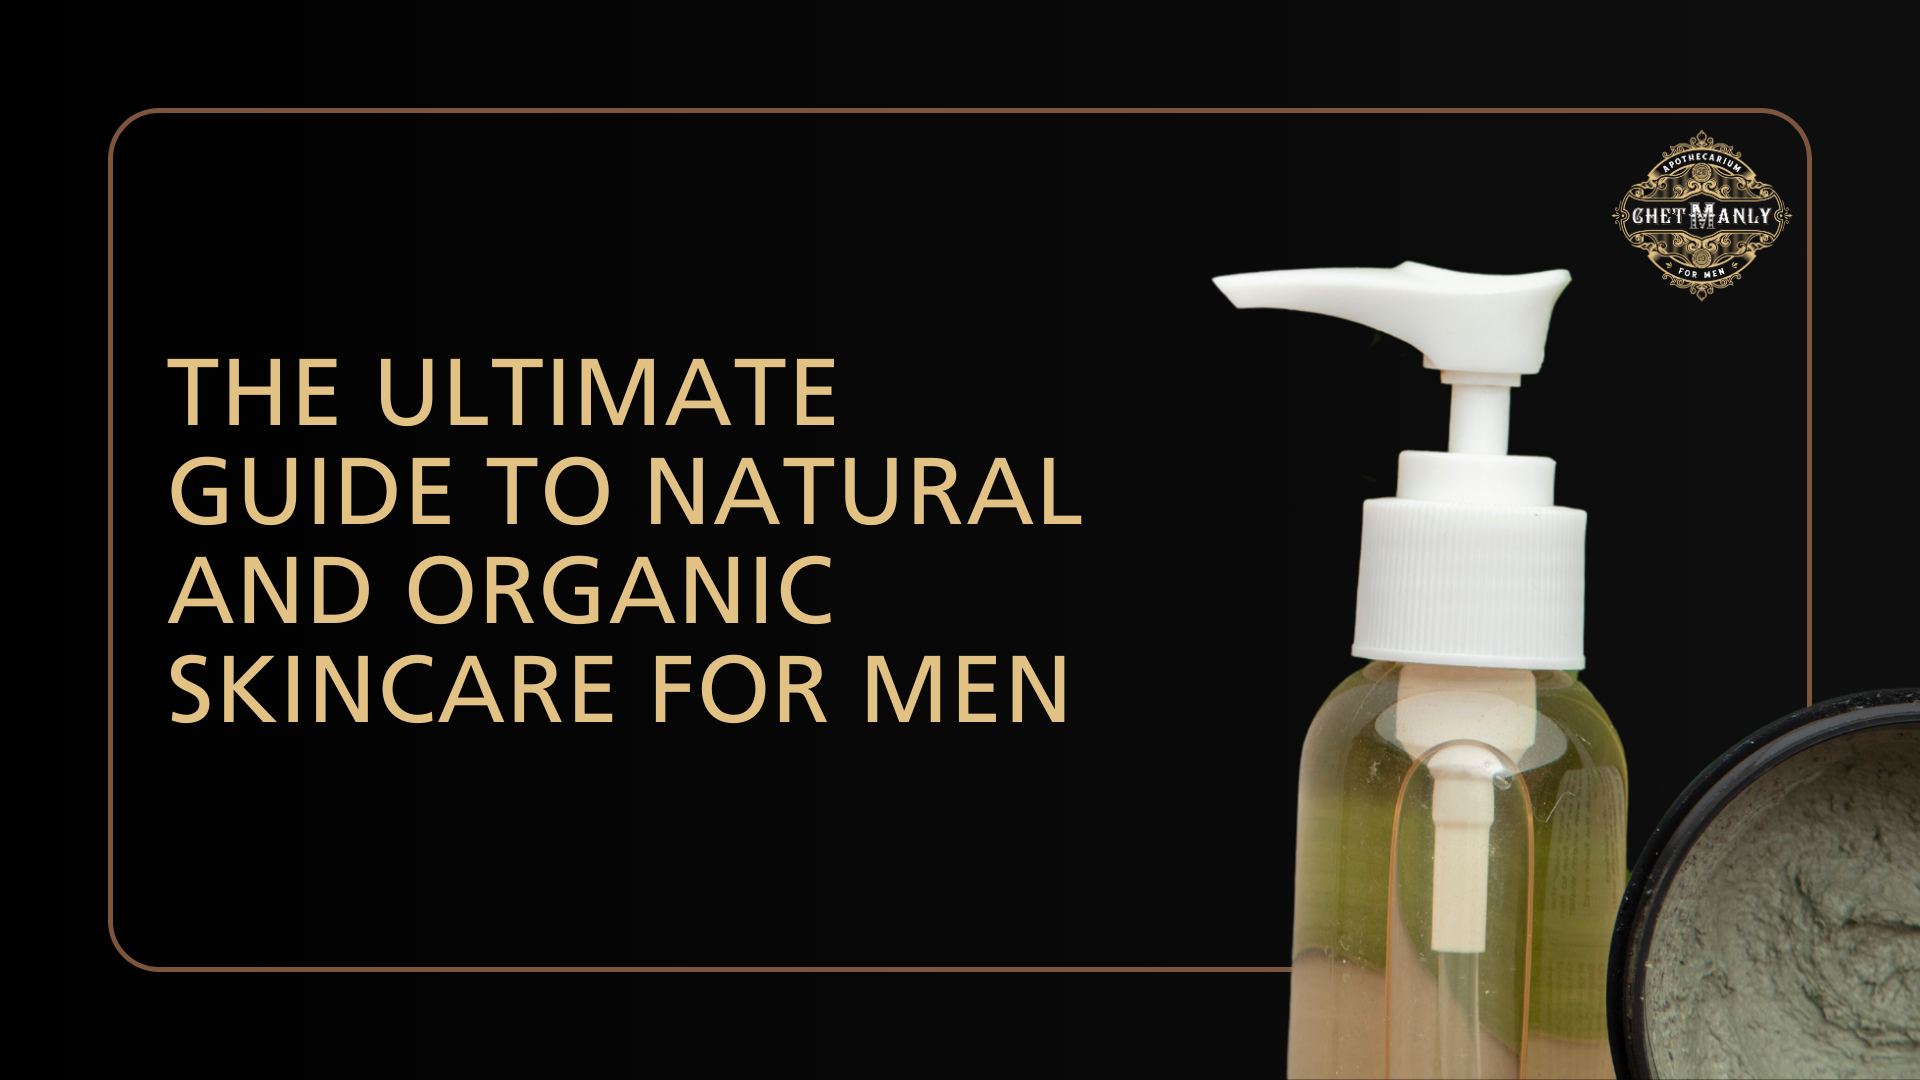 The Ultimate Guide to Natural and Organic Skincare for Men